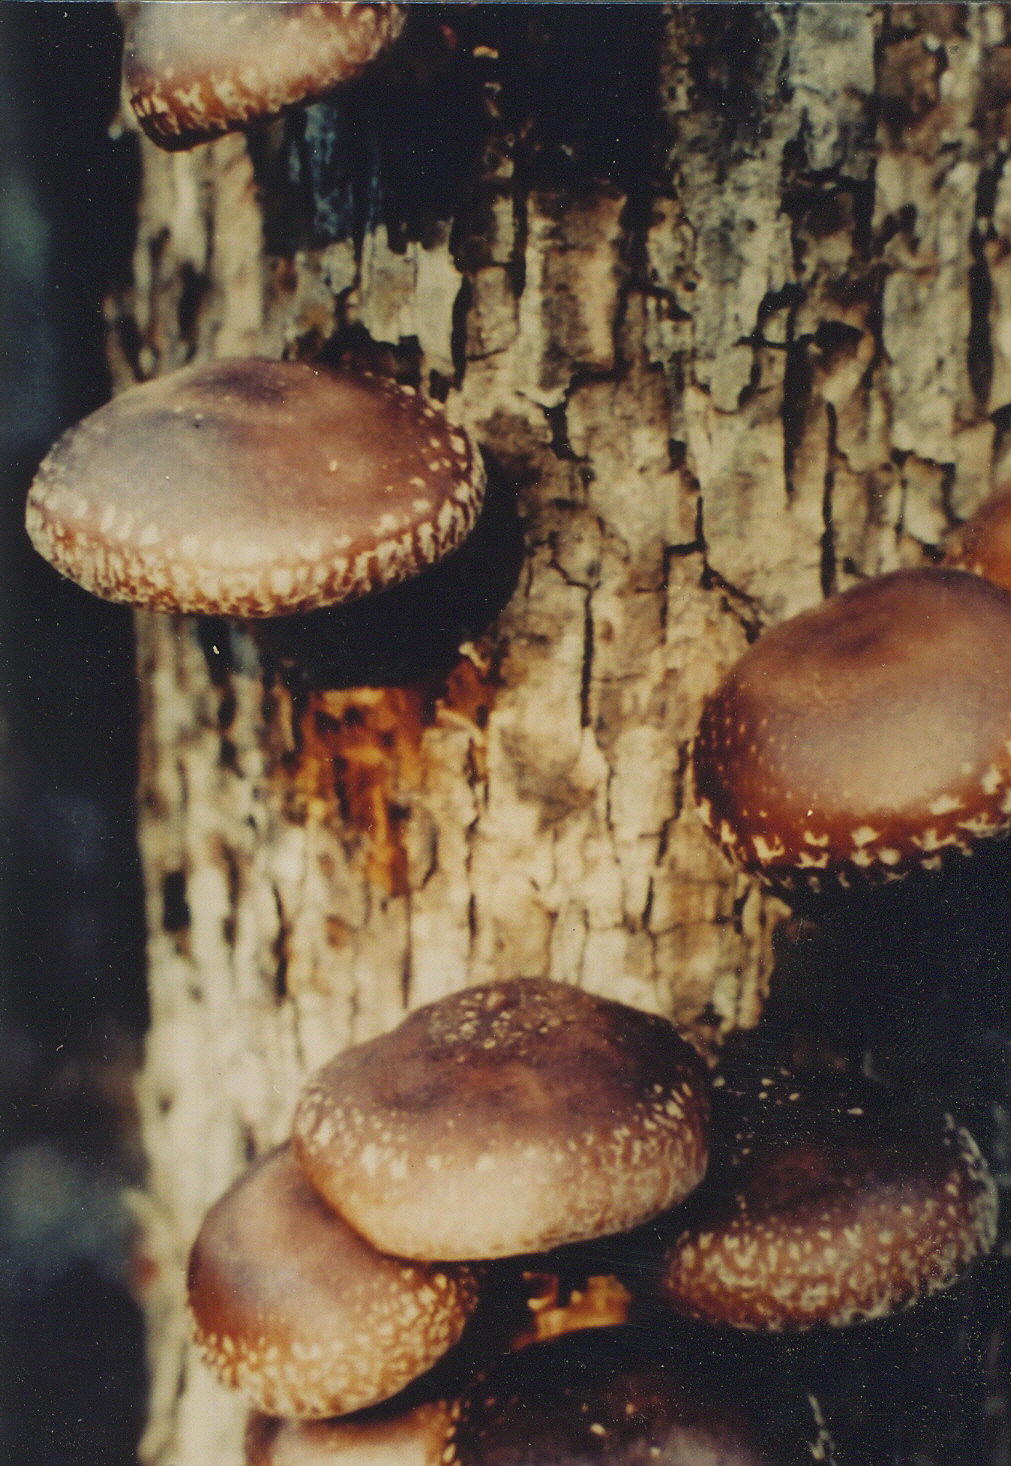 Grow Shiitakes on logs-- Best flavor and highest nutritional and health benefits.